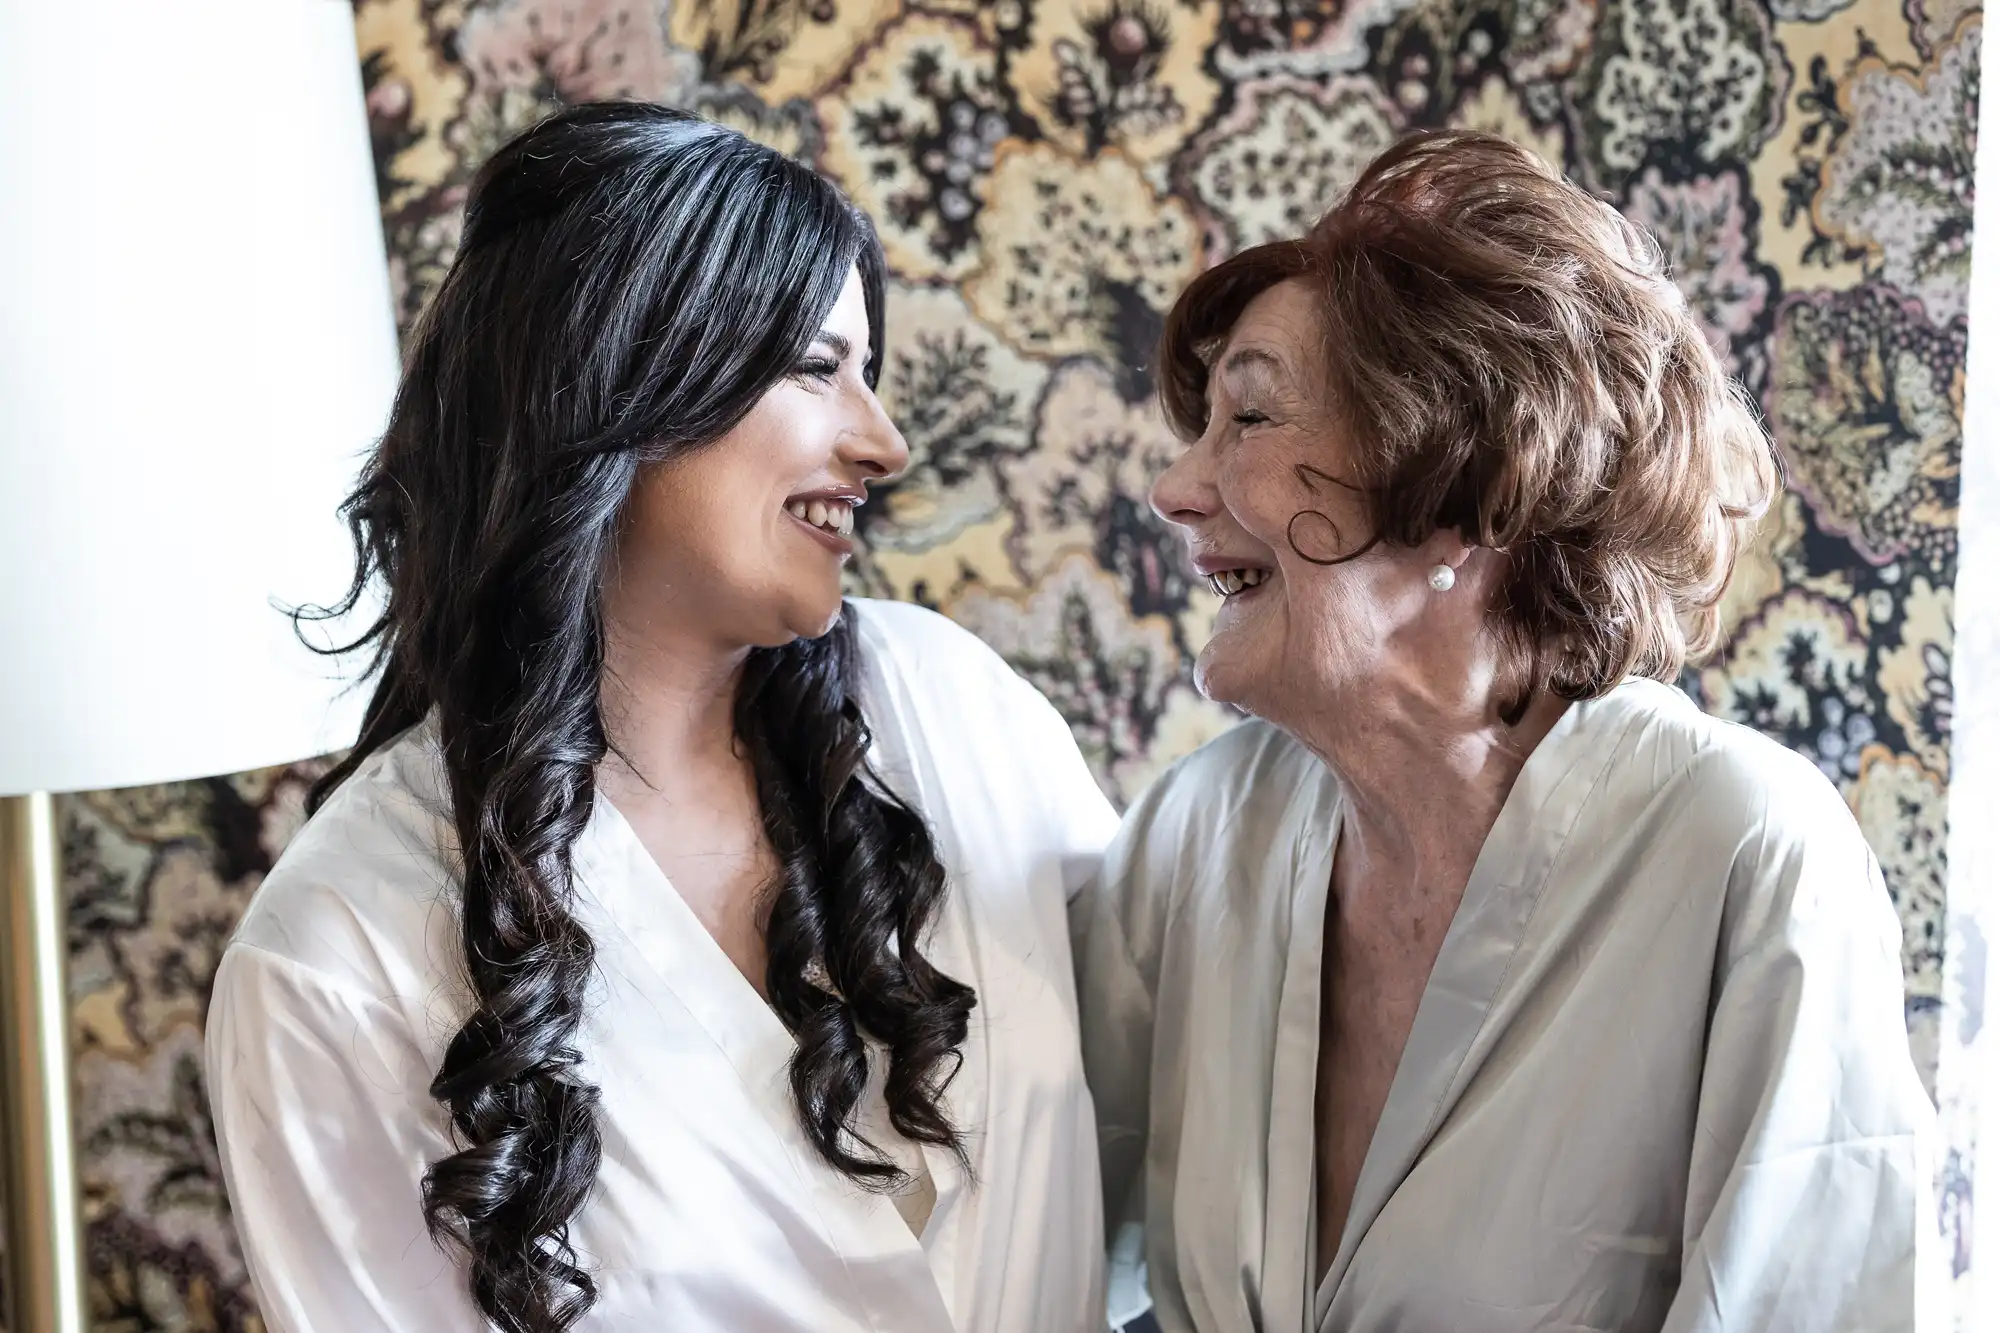 Two women, one younger and one older, smiling at each other in a warmly lit room with patterned wallpaper, both wearing white robes.